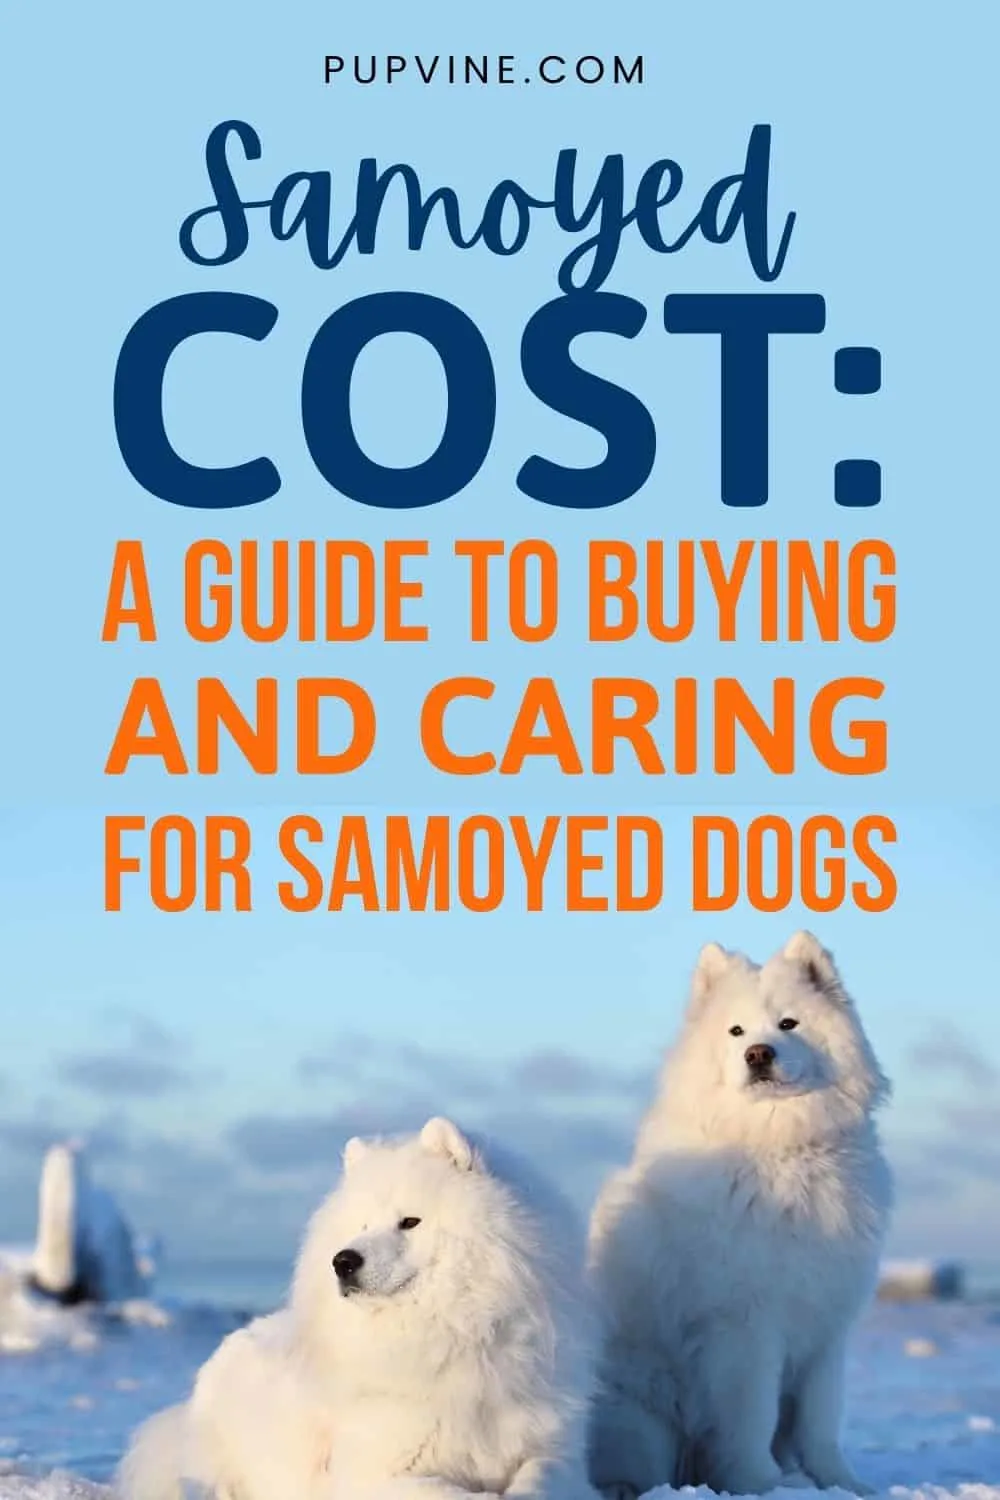 Samoyed Cost A Guide To Buying And Caring For Samoyed Dogs